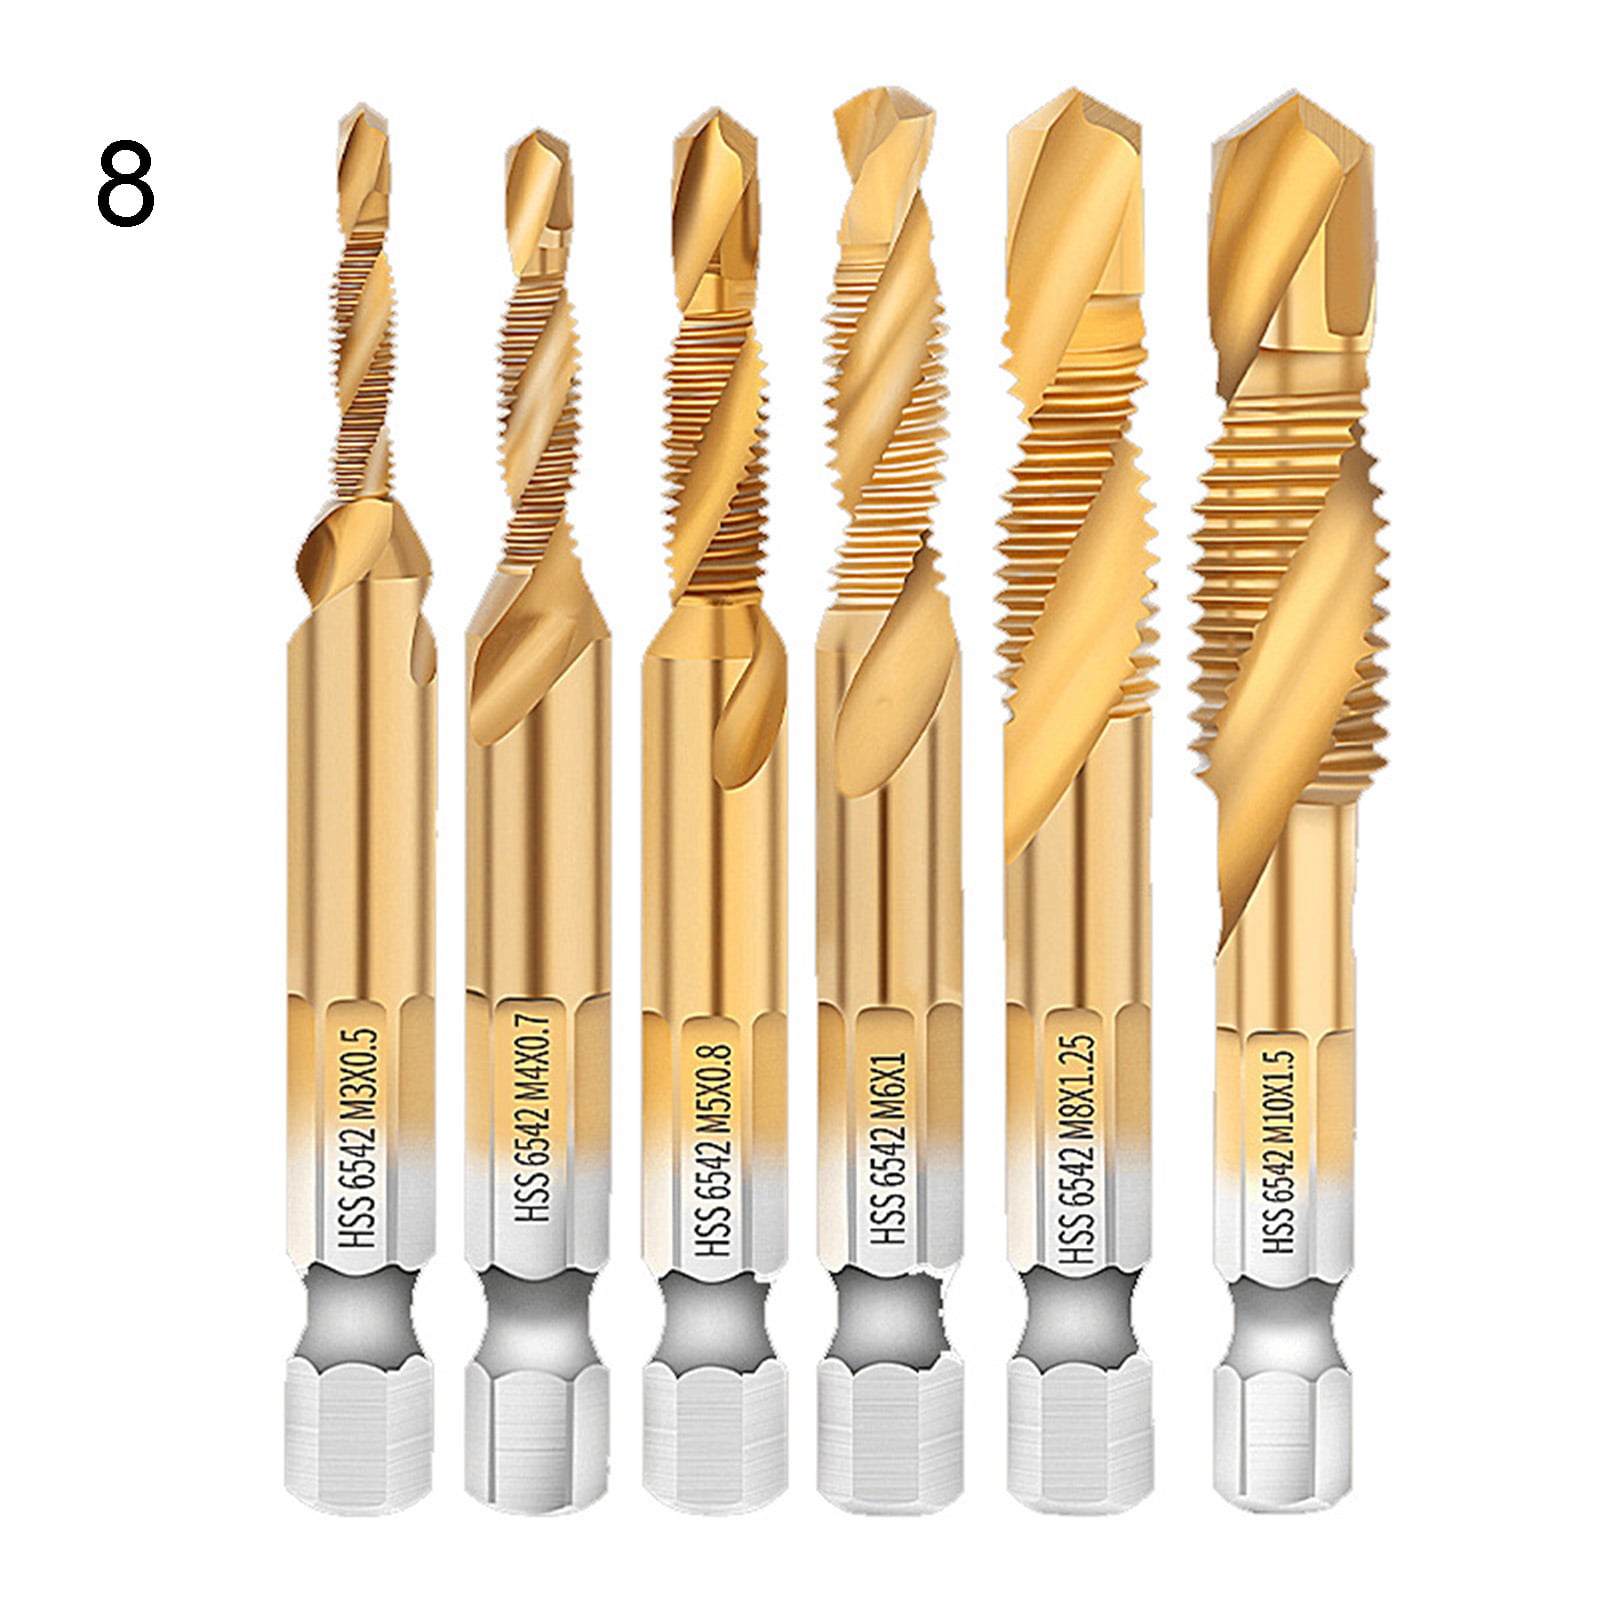 Details about   Drill Bits Set Hex Shank Tap Screw Compound Tapping Set Metric Thread M3-M10 